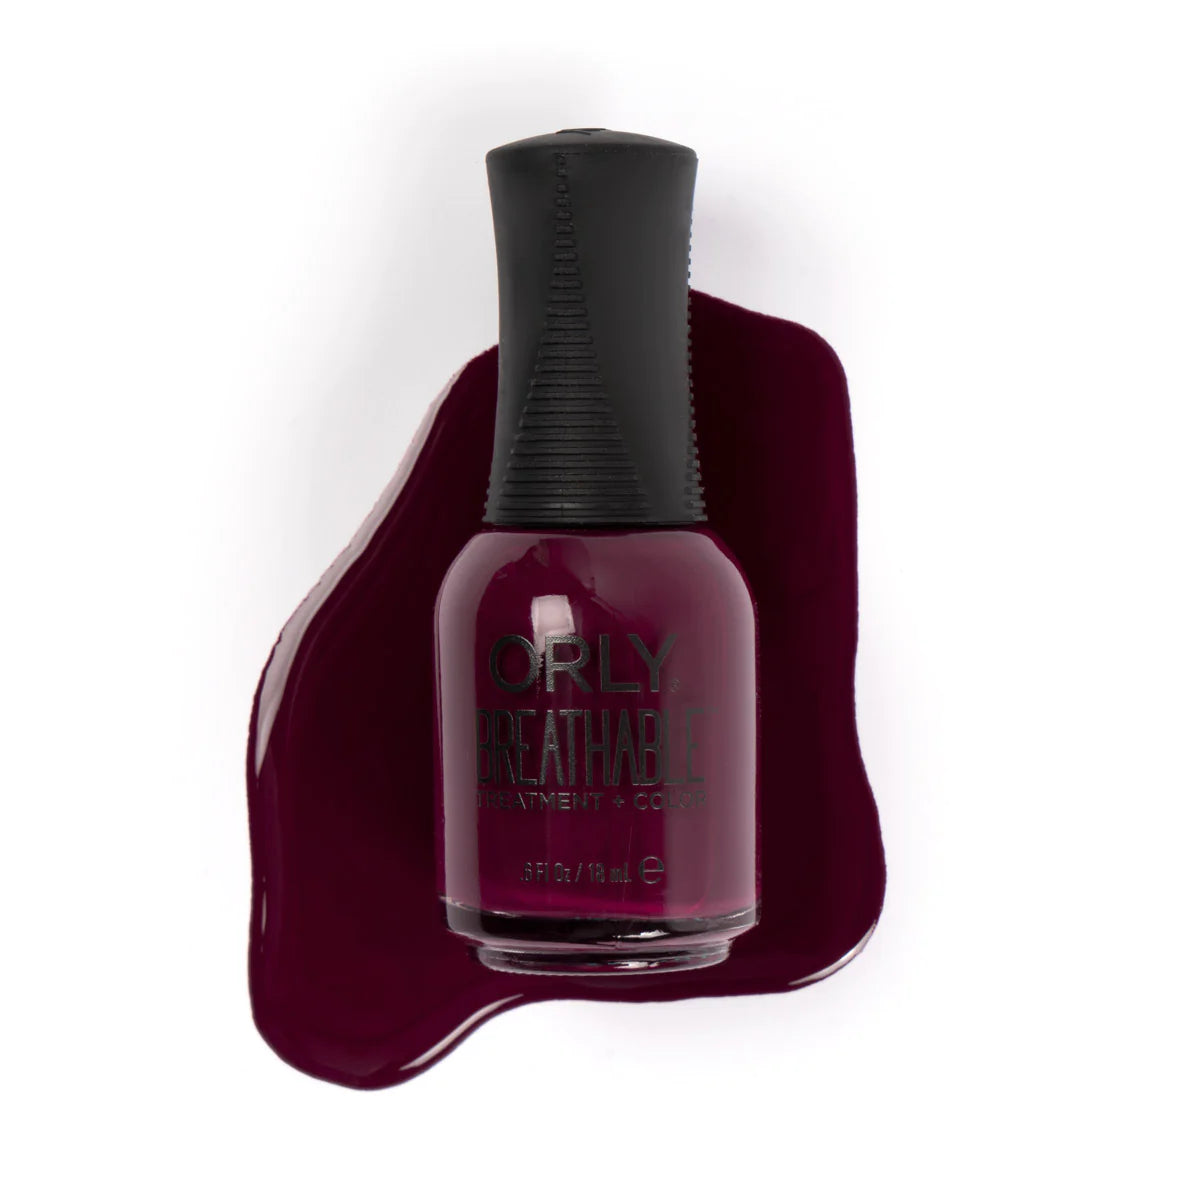 ORLY Breathable The Antidote